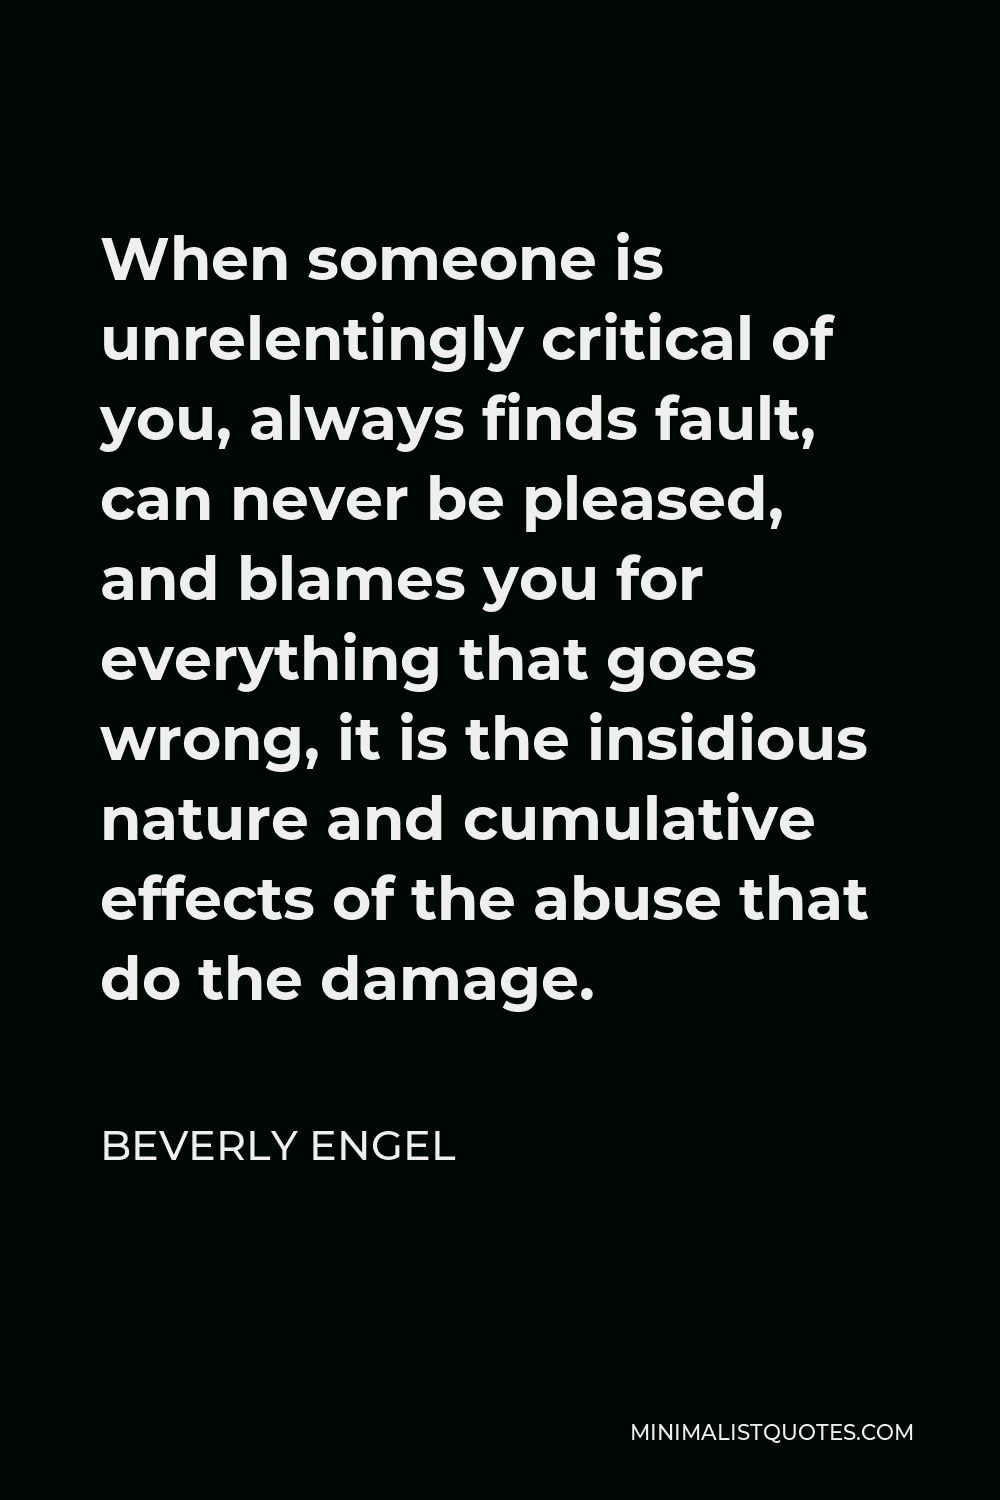 Beverly Engel Quote - When someone is unrelentingly critical of you, always finds fault, can never be pleased, and blames you for everything that goes wrong, it is the insidious nature and cumulative effects of the abuse that do the damage.